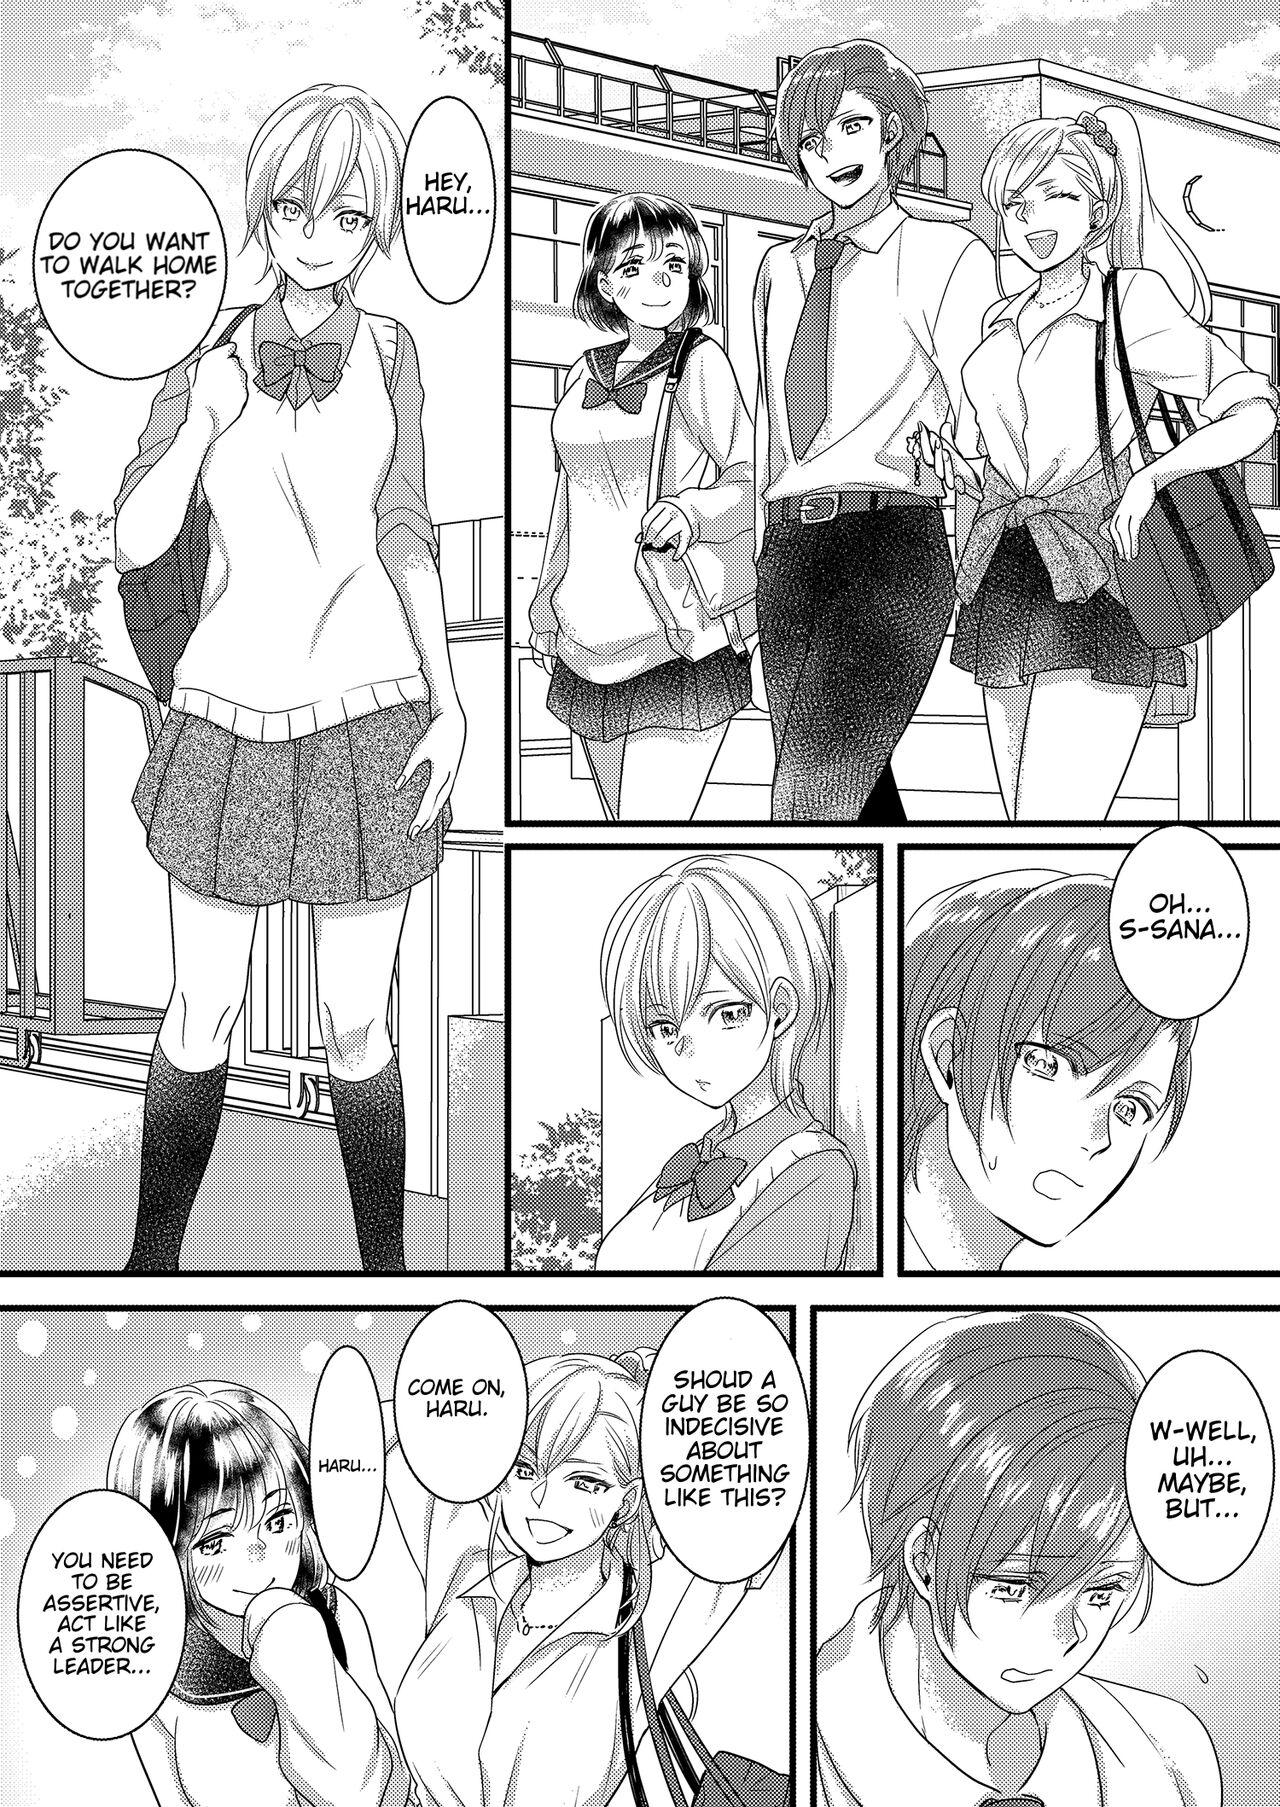 Perverted Haru and Sana ～Love Connected Through Cosplay～ - Original Culo - Page 1